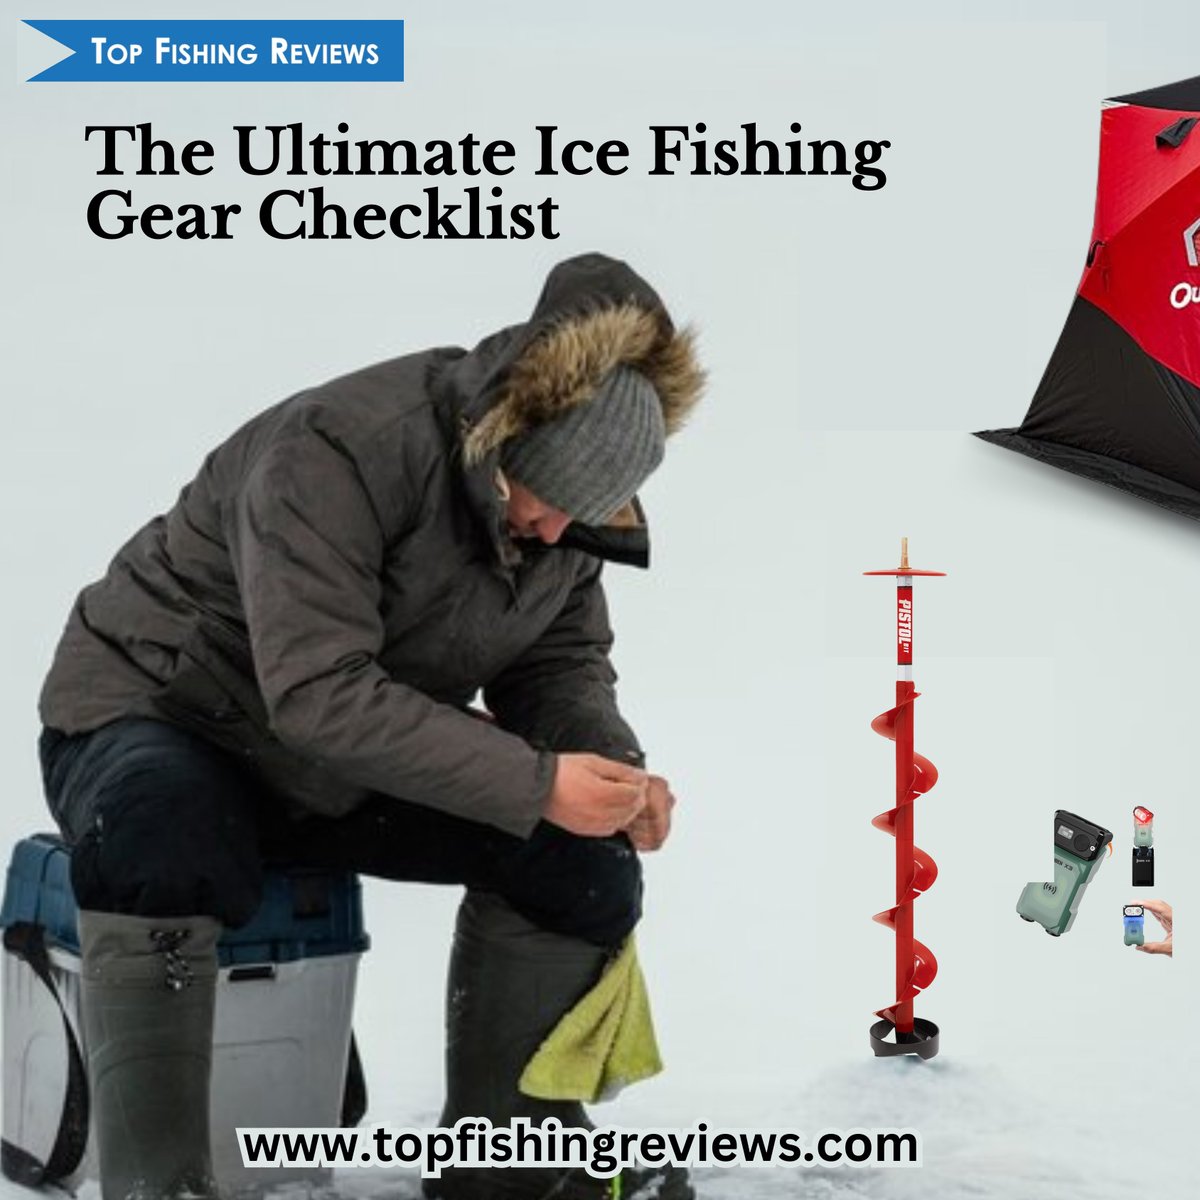 'Dive into the world of frozen wonders with The Ultimate Ice Fishing Gear Checklist! 🌨️🎣 Equip yourself for a frosty angling experience with these must-haves.

Please visit- topfishingreviews.com

#IceFishingEssentials #FrozenAdventureGear #WinterAnglingKit #ChillThrills '